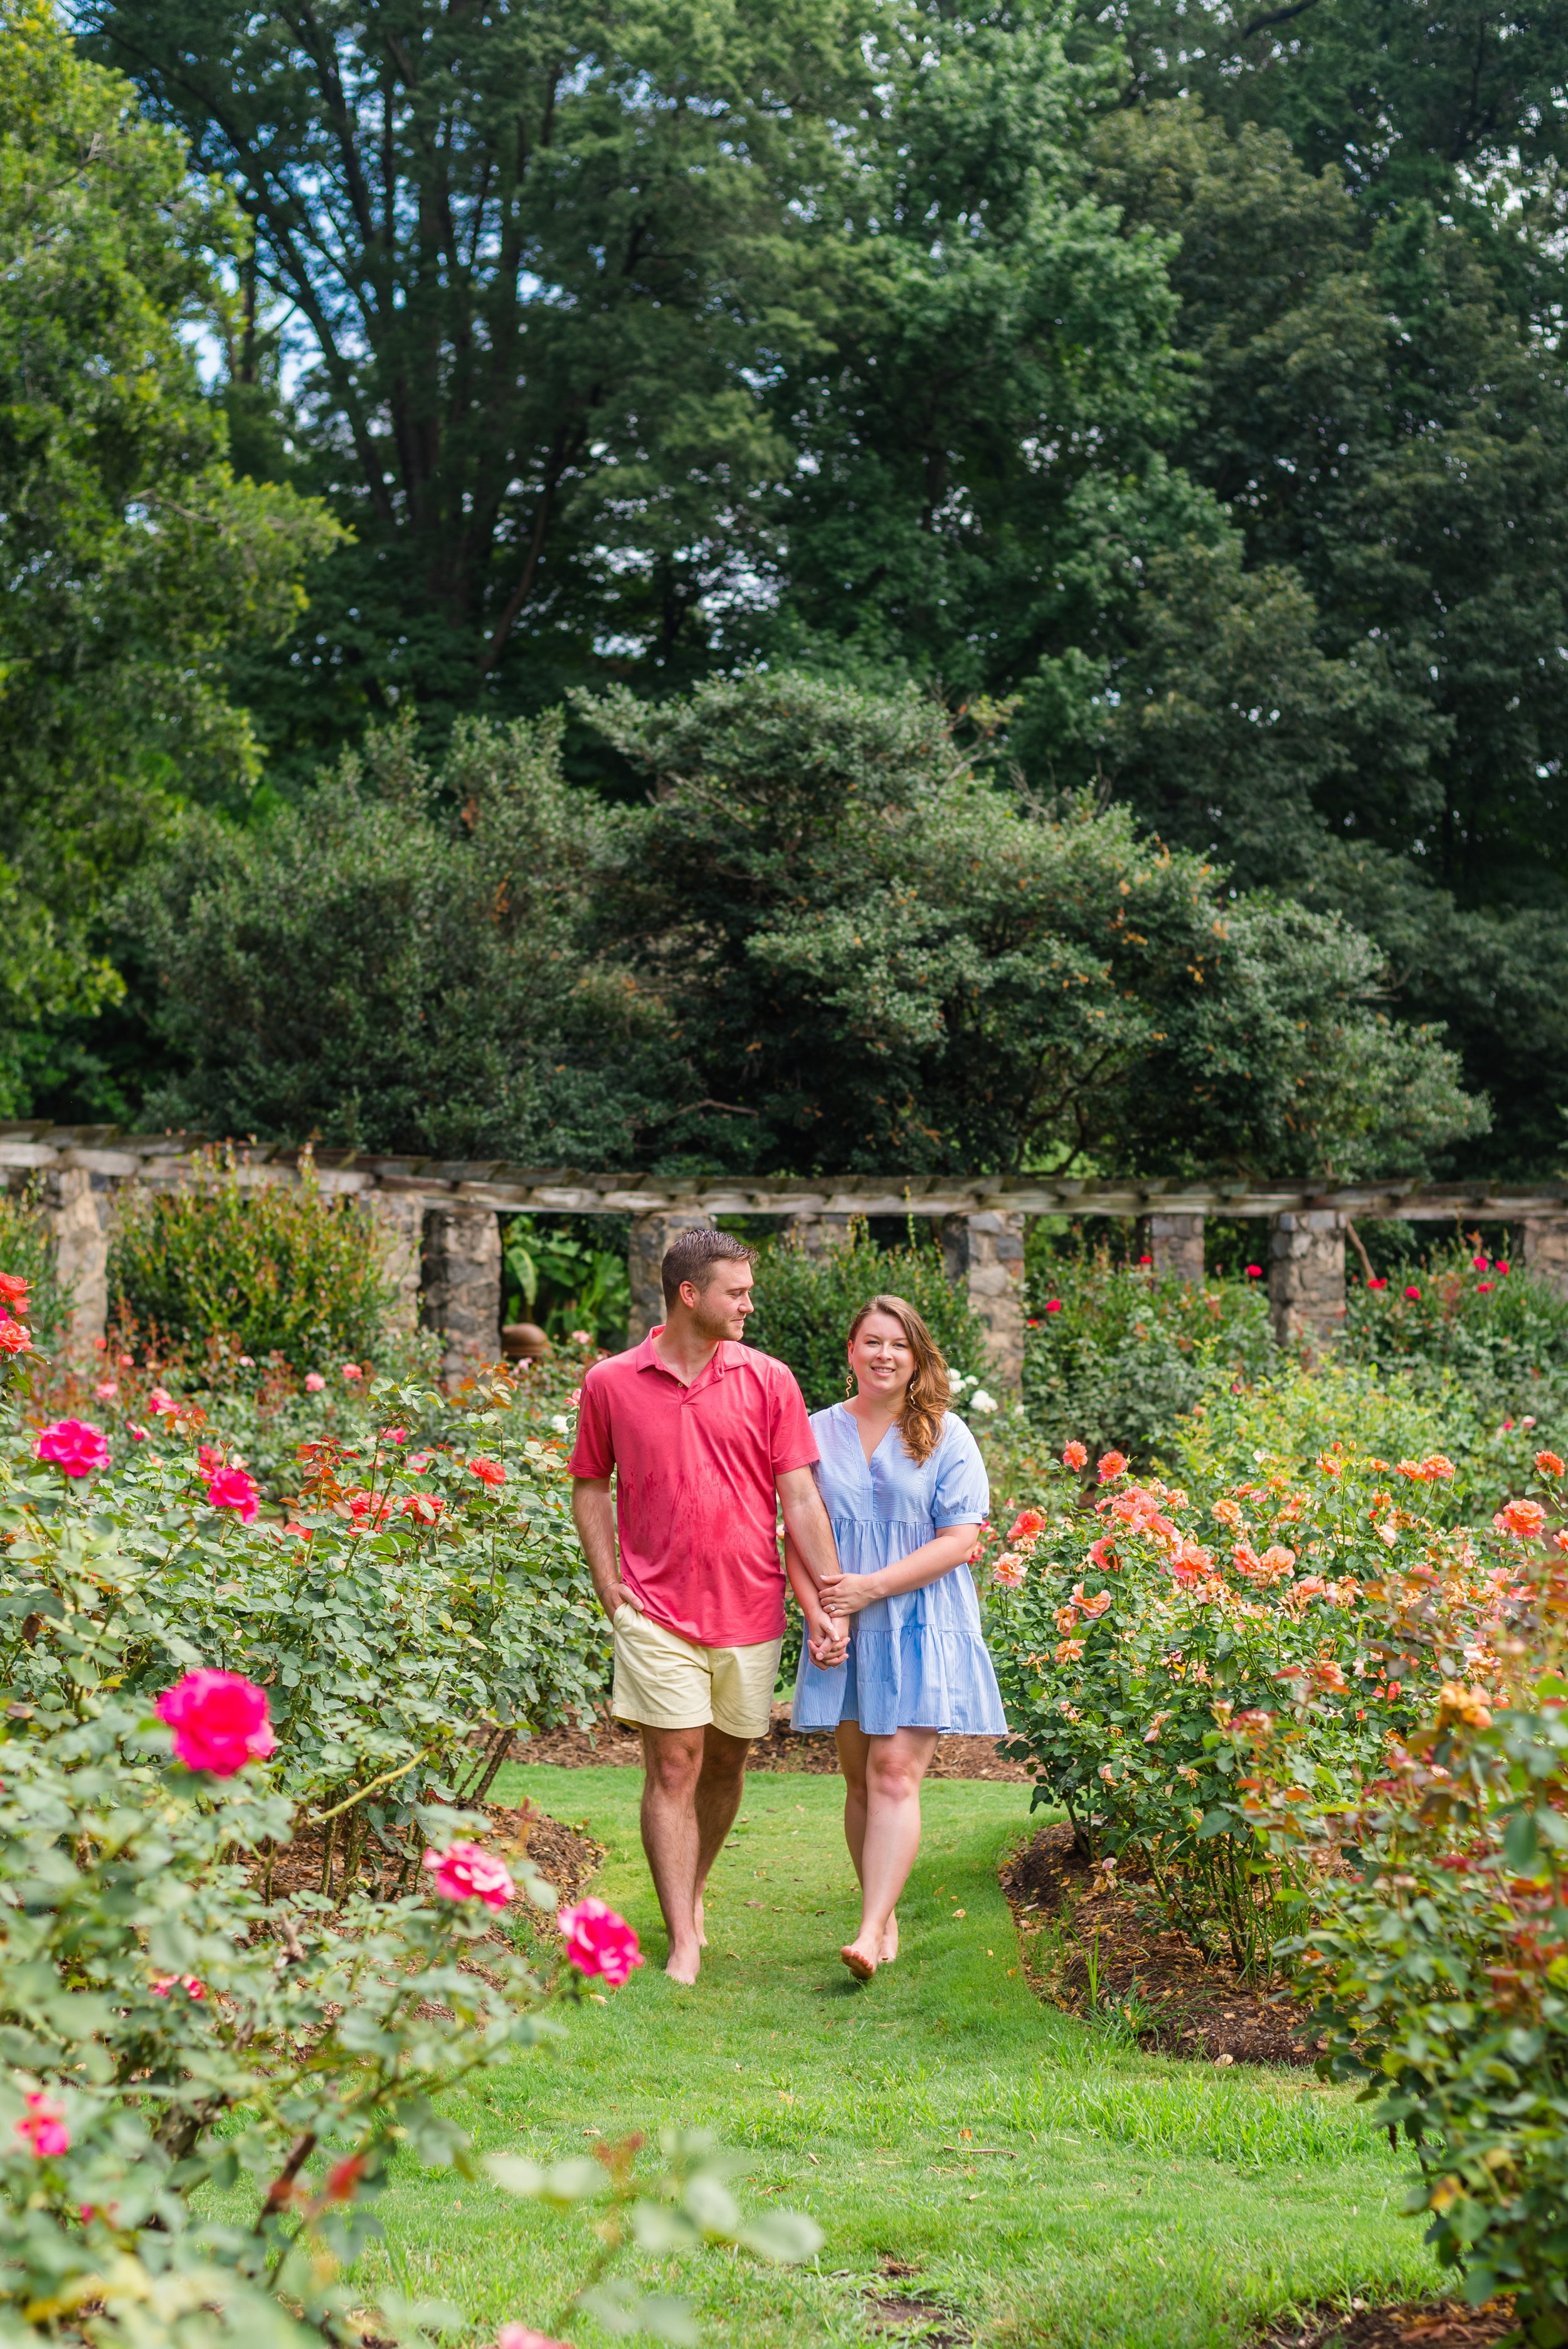 Summer Picnic Proposal At The Raleigh Rose Garden — Southern Picnics